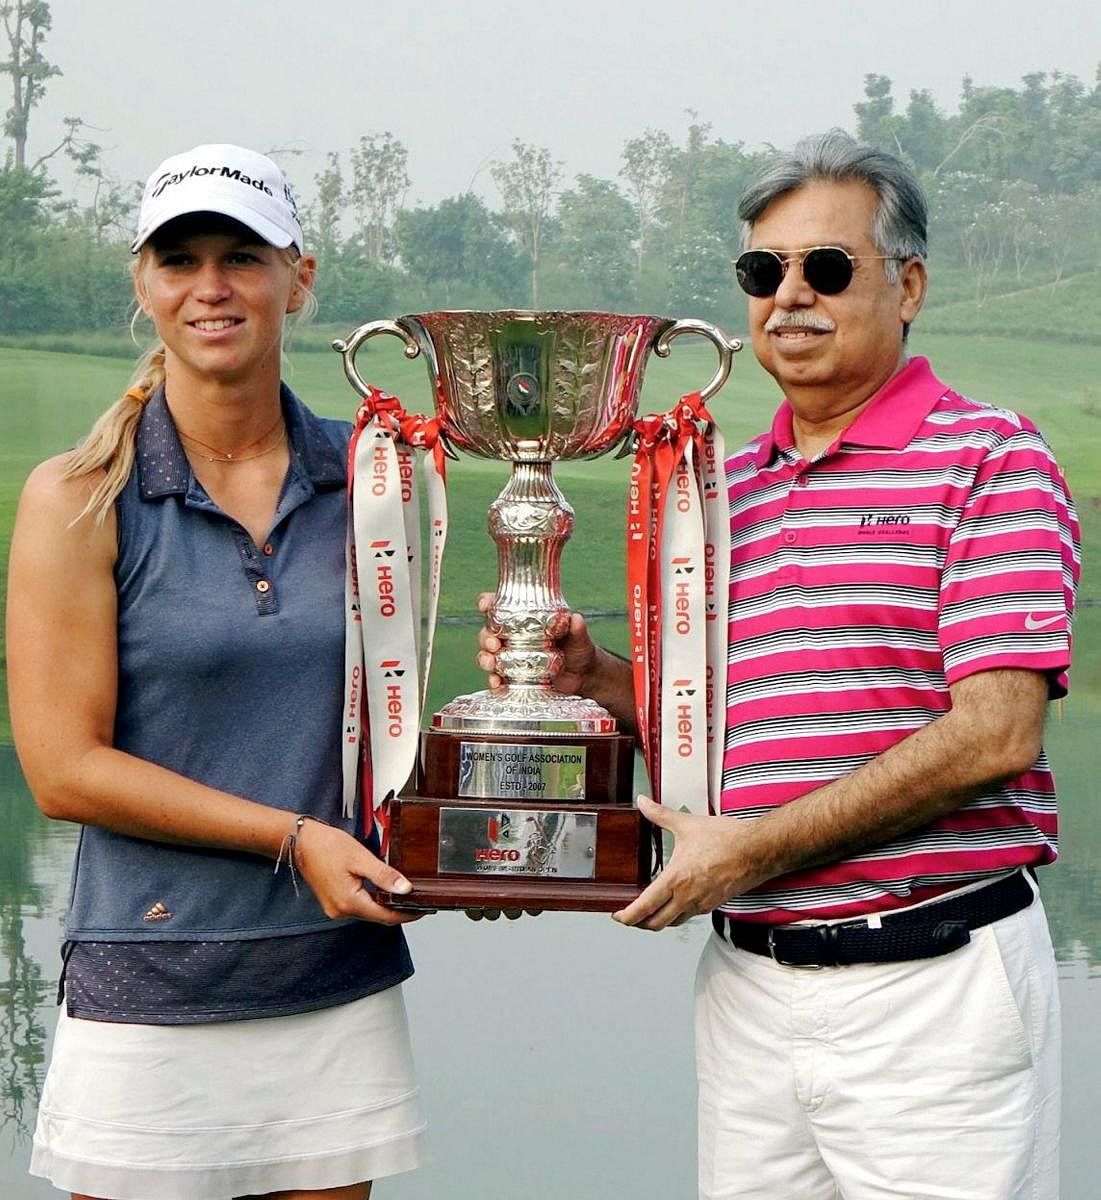 SWEET VICTORY Camille Chevalier (left) receives the Hero Women's Indian Open trophy from Pawan Munjal, CMD of Hero MotoCorp, on Sunday. PTI